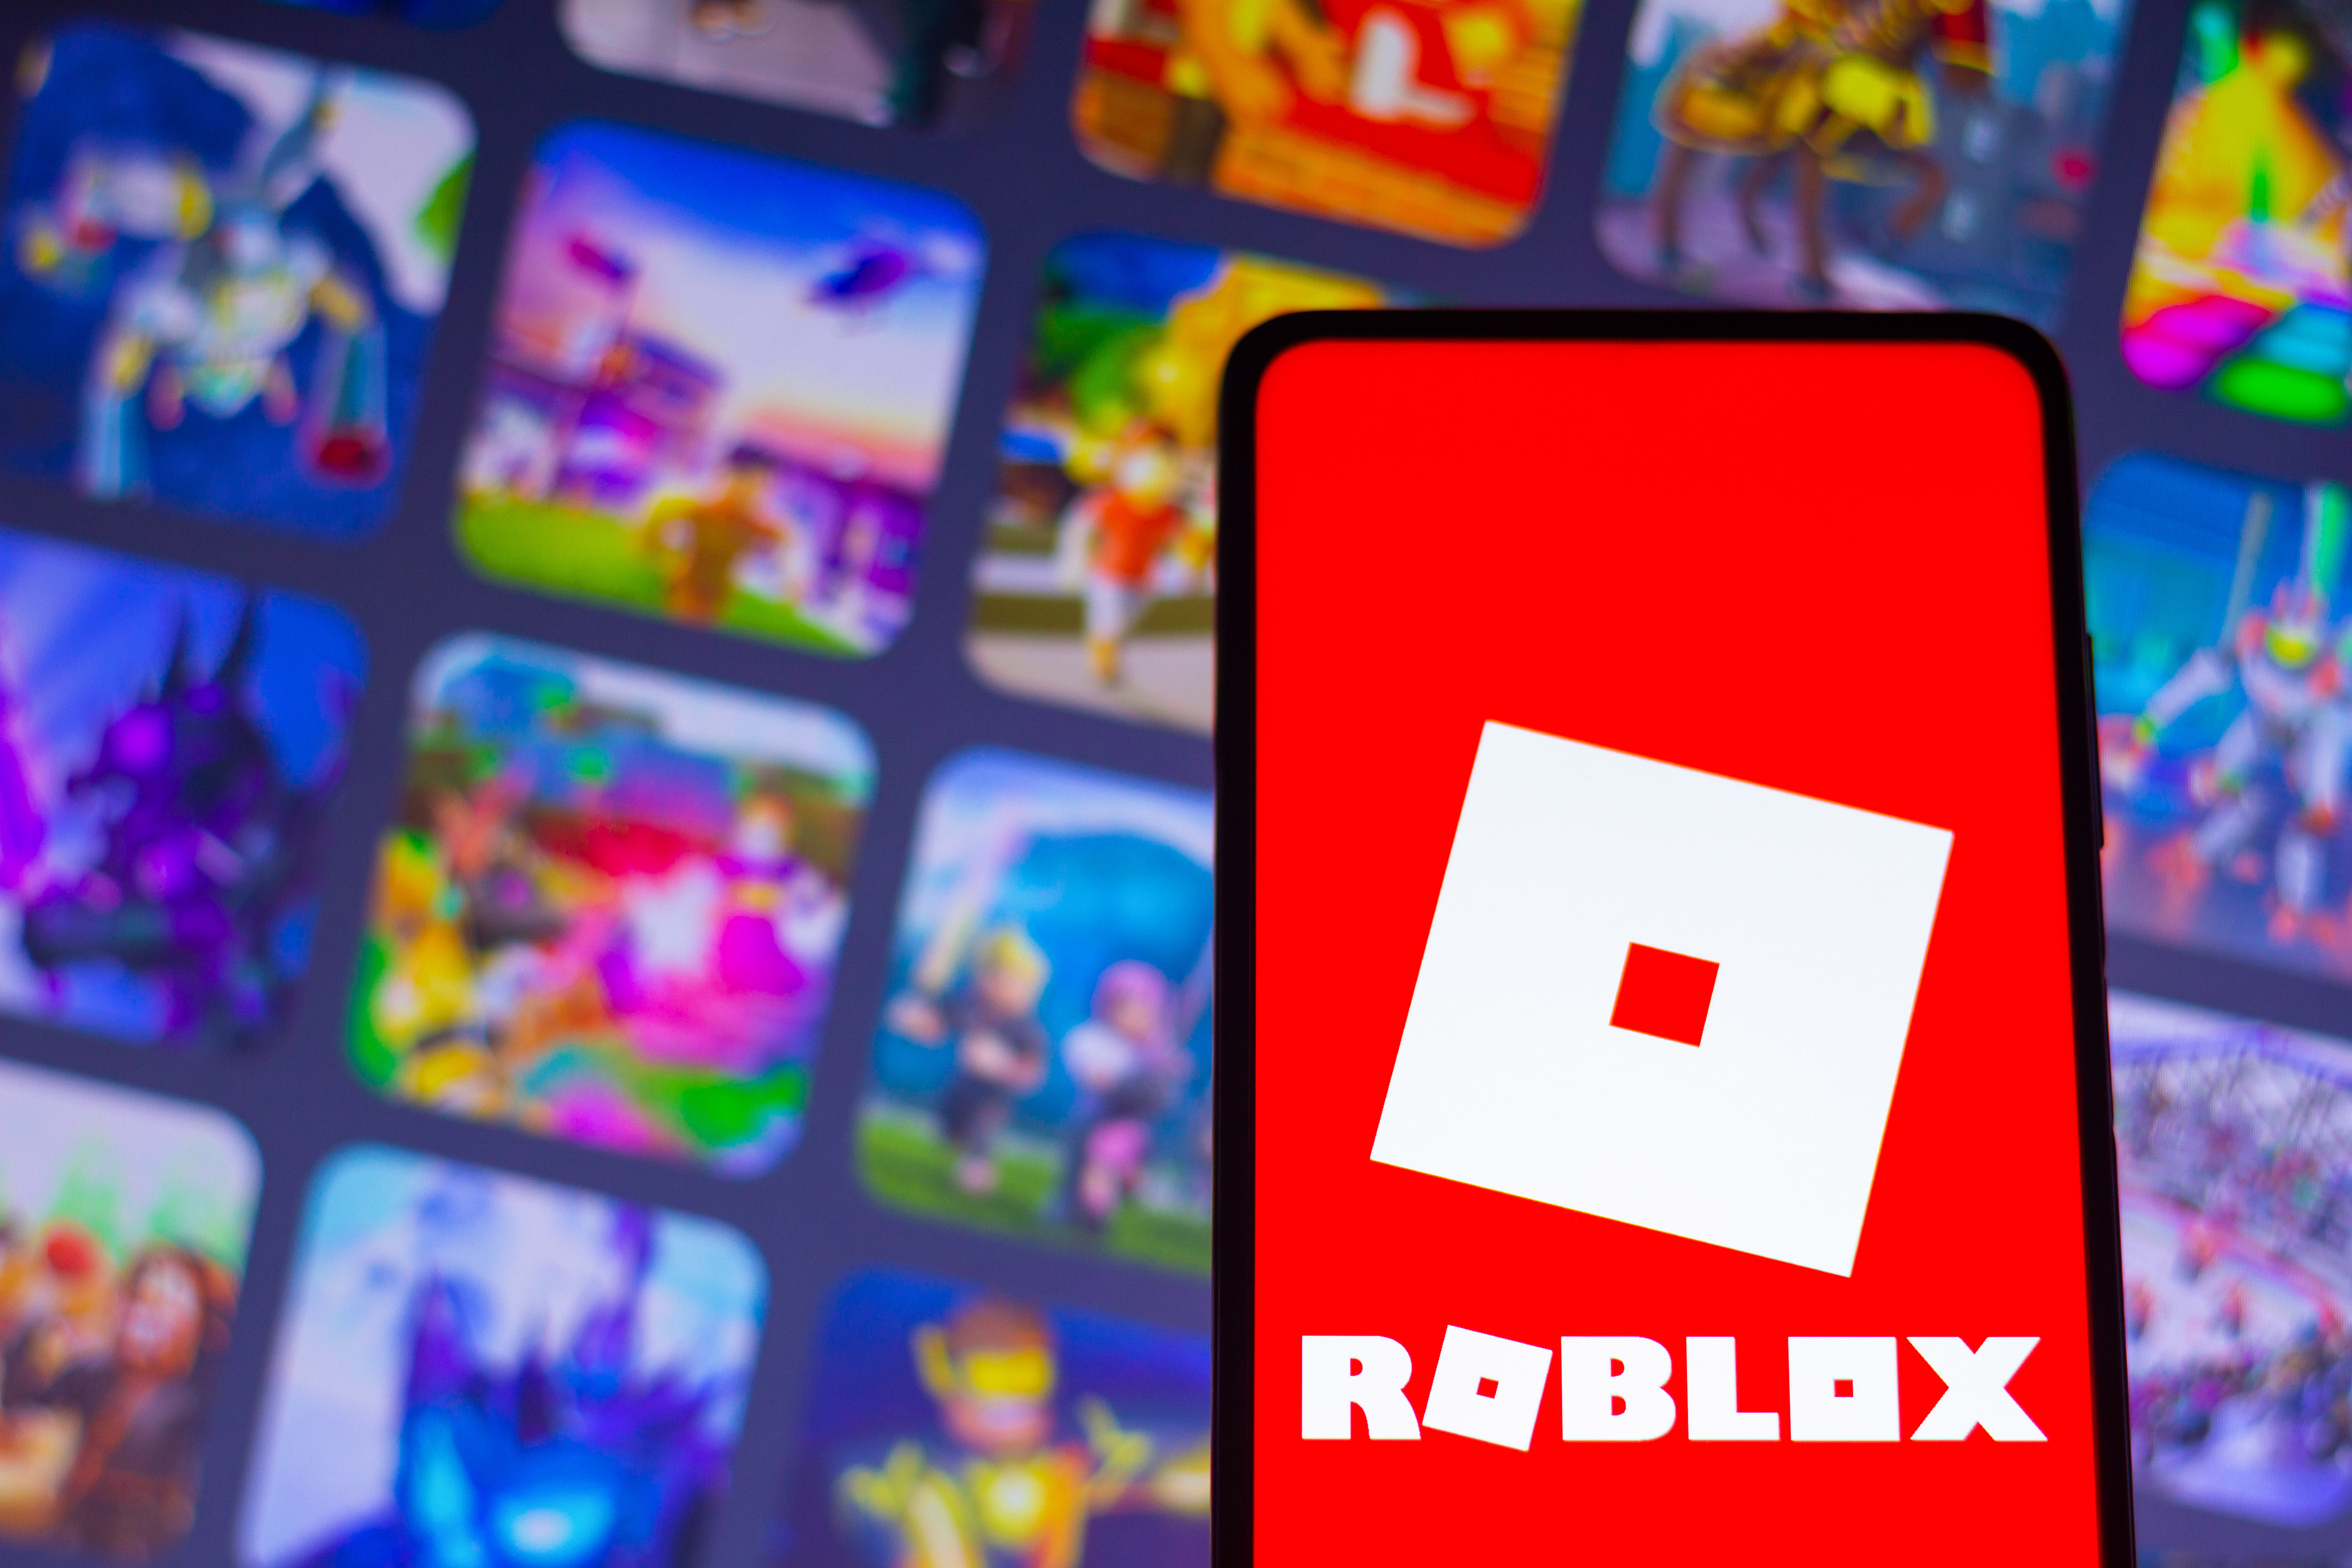 Hacking Device - Roblox